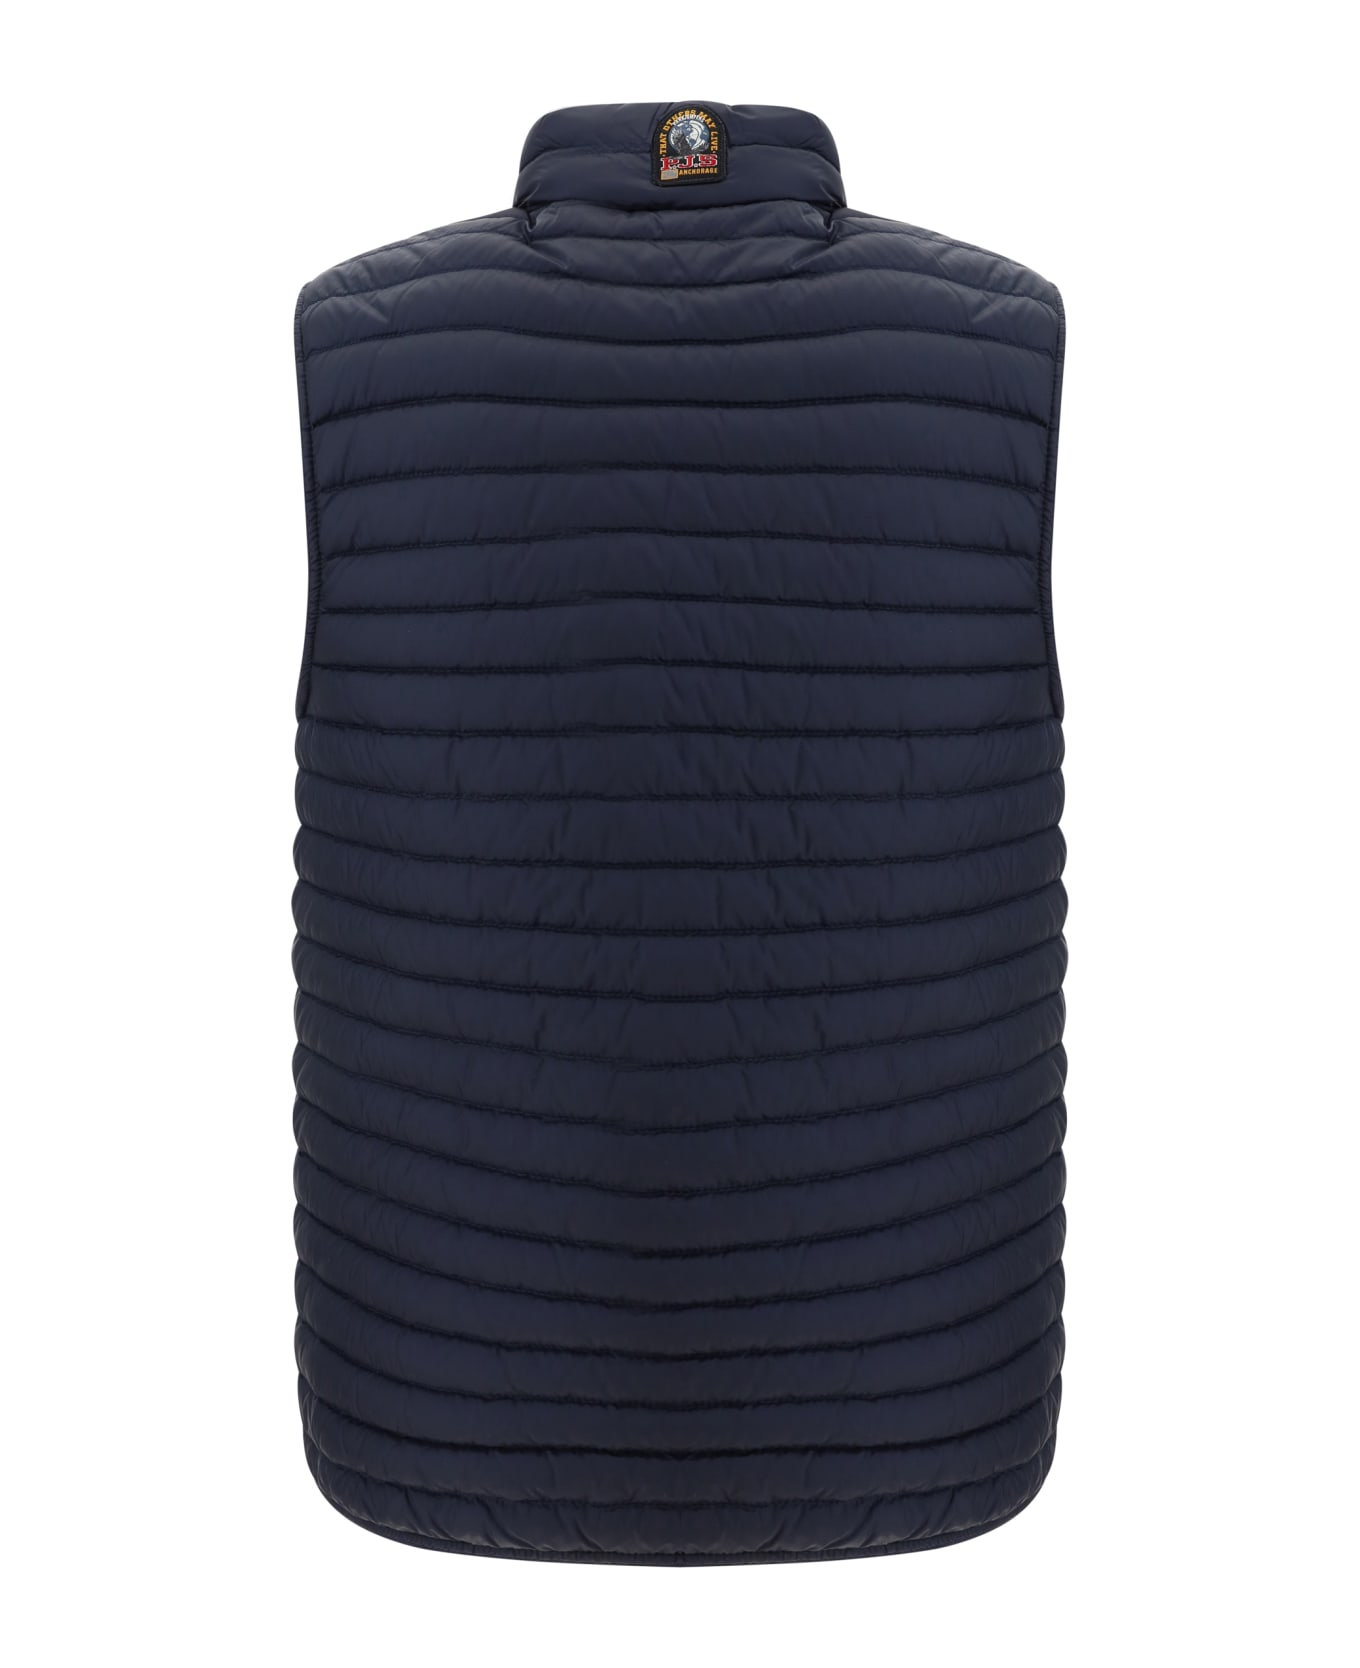 Parajumpers Gino Down Vest - Blue Navy